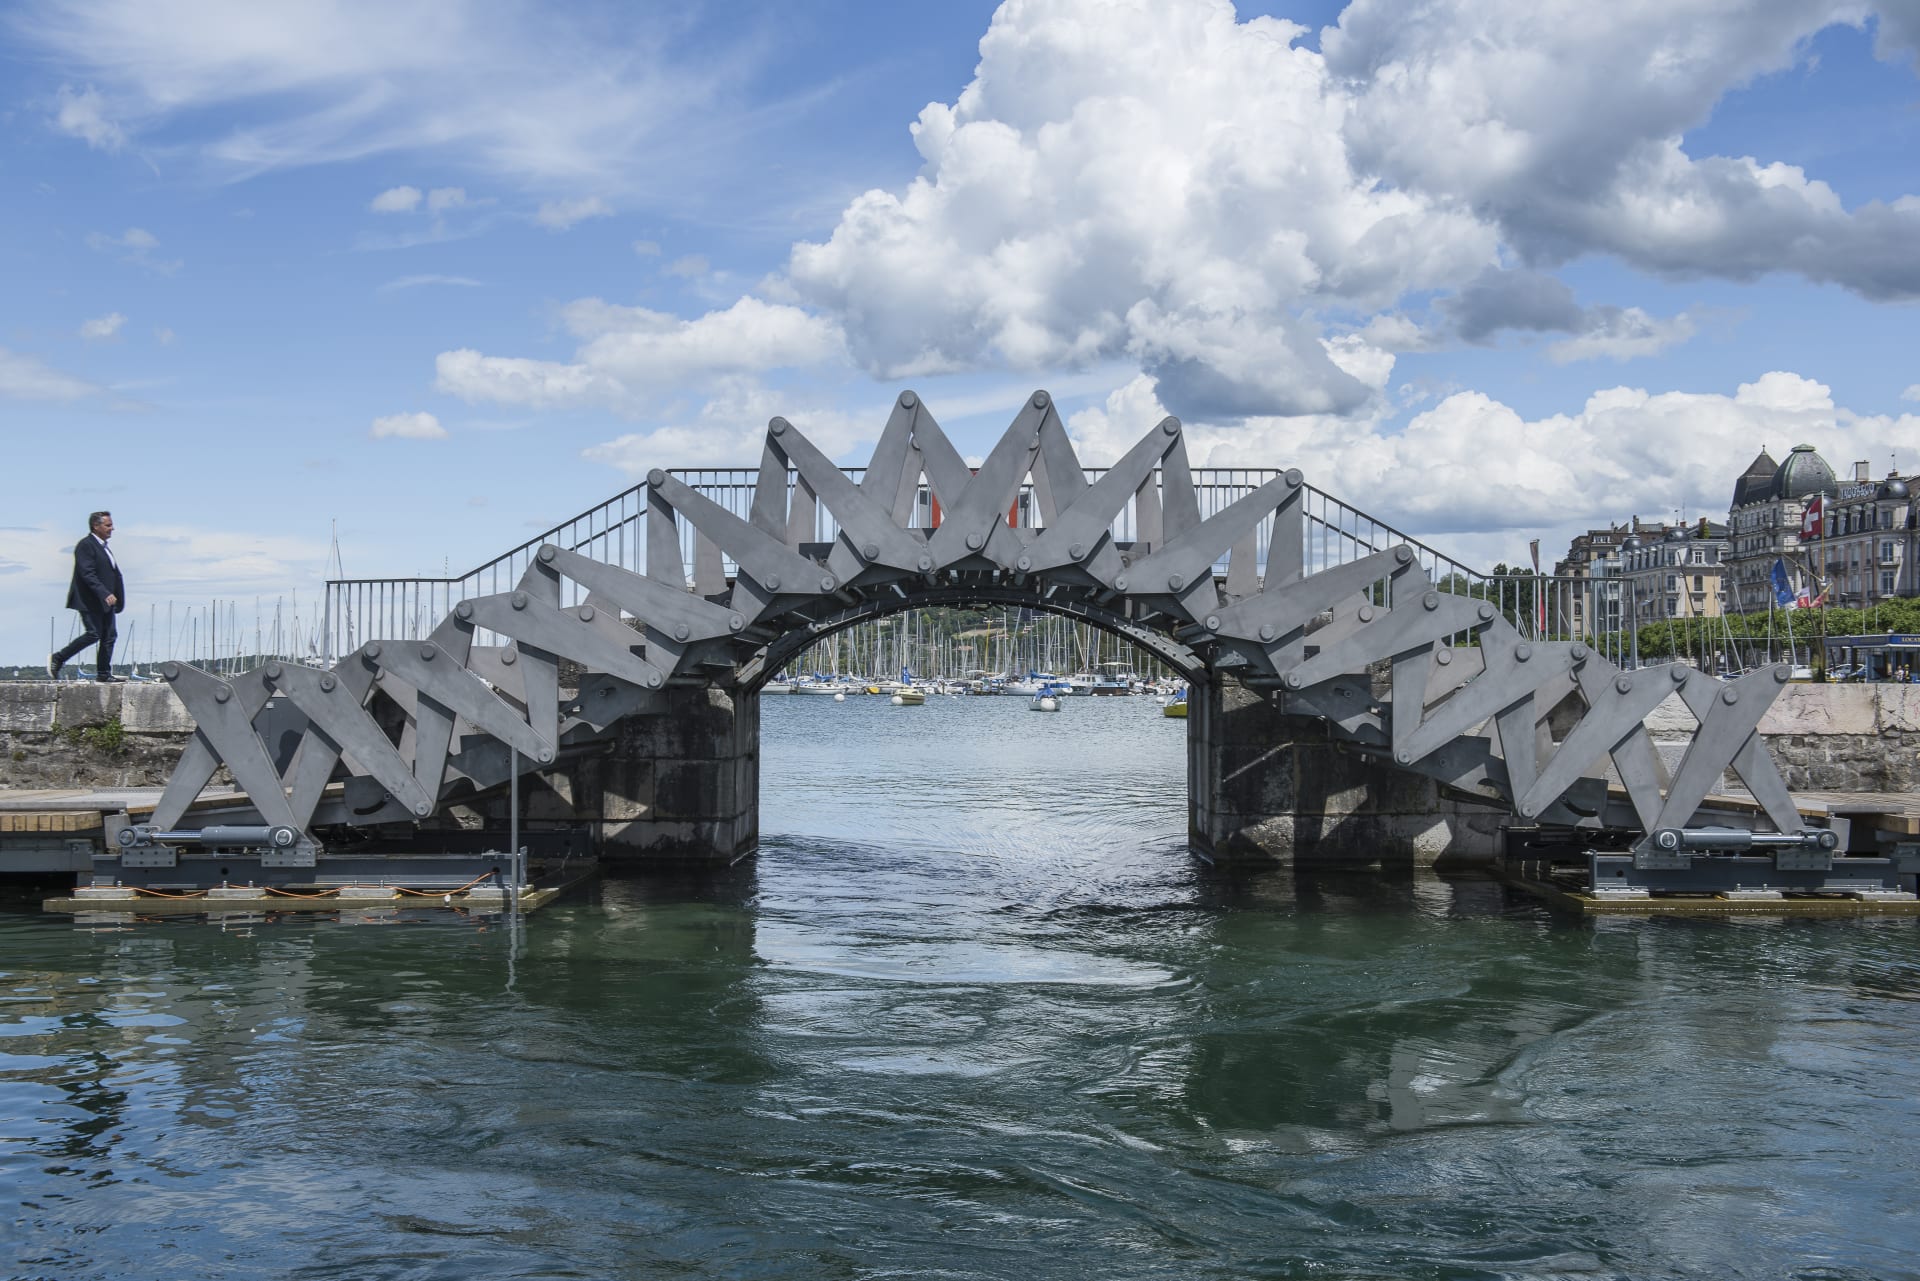 Many of our members are bridge designers, connecting communities and improving access in elegant, interesting ways (image: Geneva Mobile Walkway - 2017 Structural Award winner)
Credit: Gabriele Guscetti|Etienne Bouleau|Jérôme Pochat 